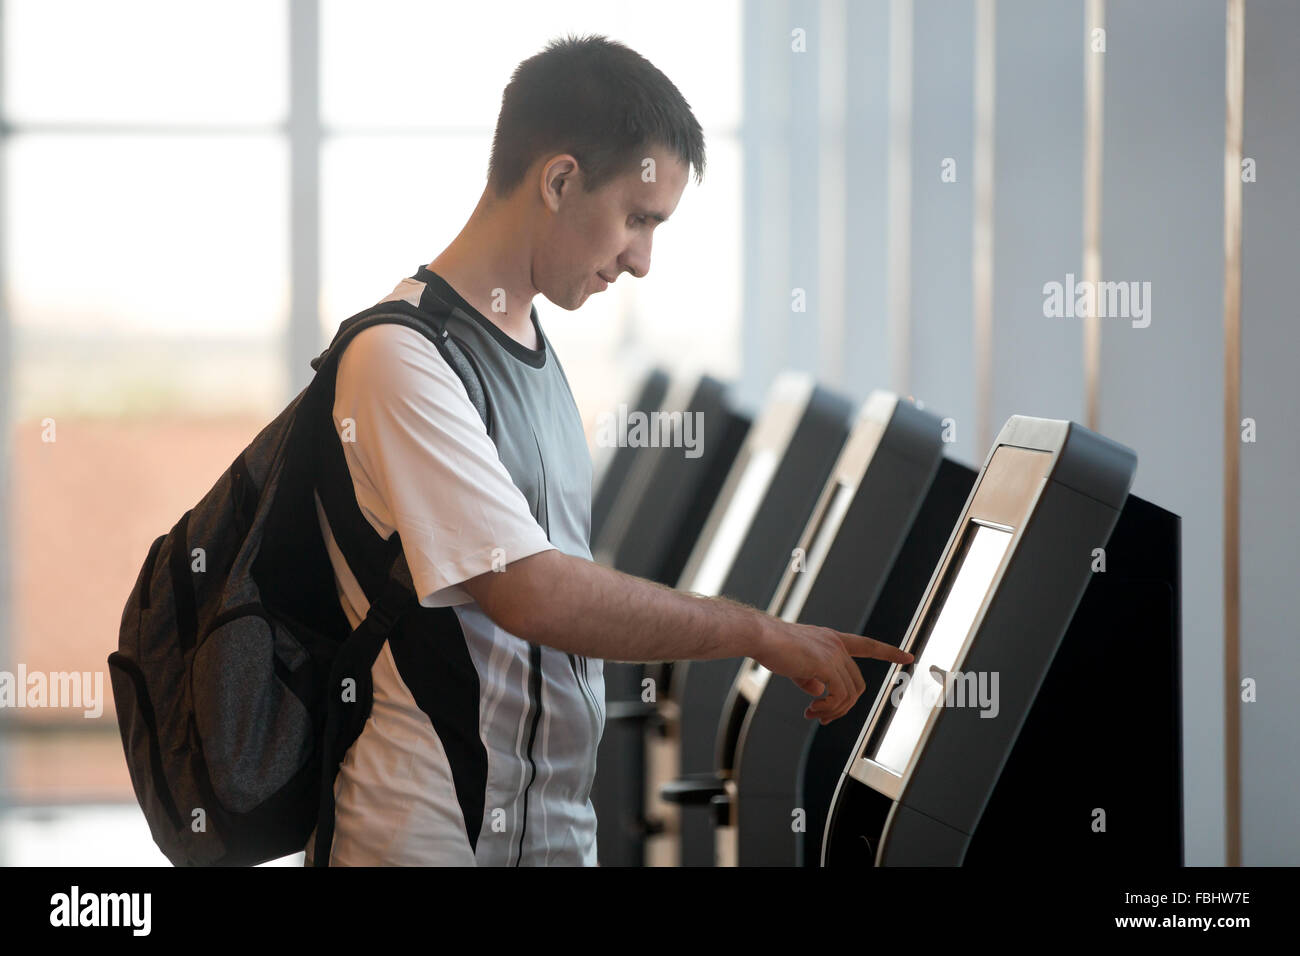 Young man with backpack touching interactive display at self-service transfer machine, doing self-check-in for flight or buying Stock Photo